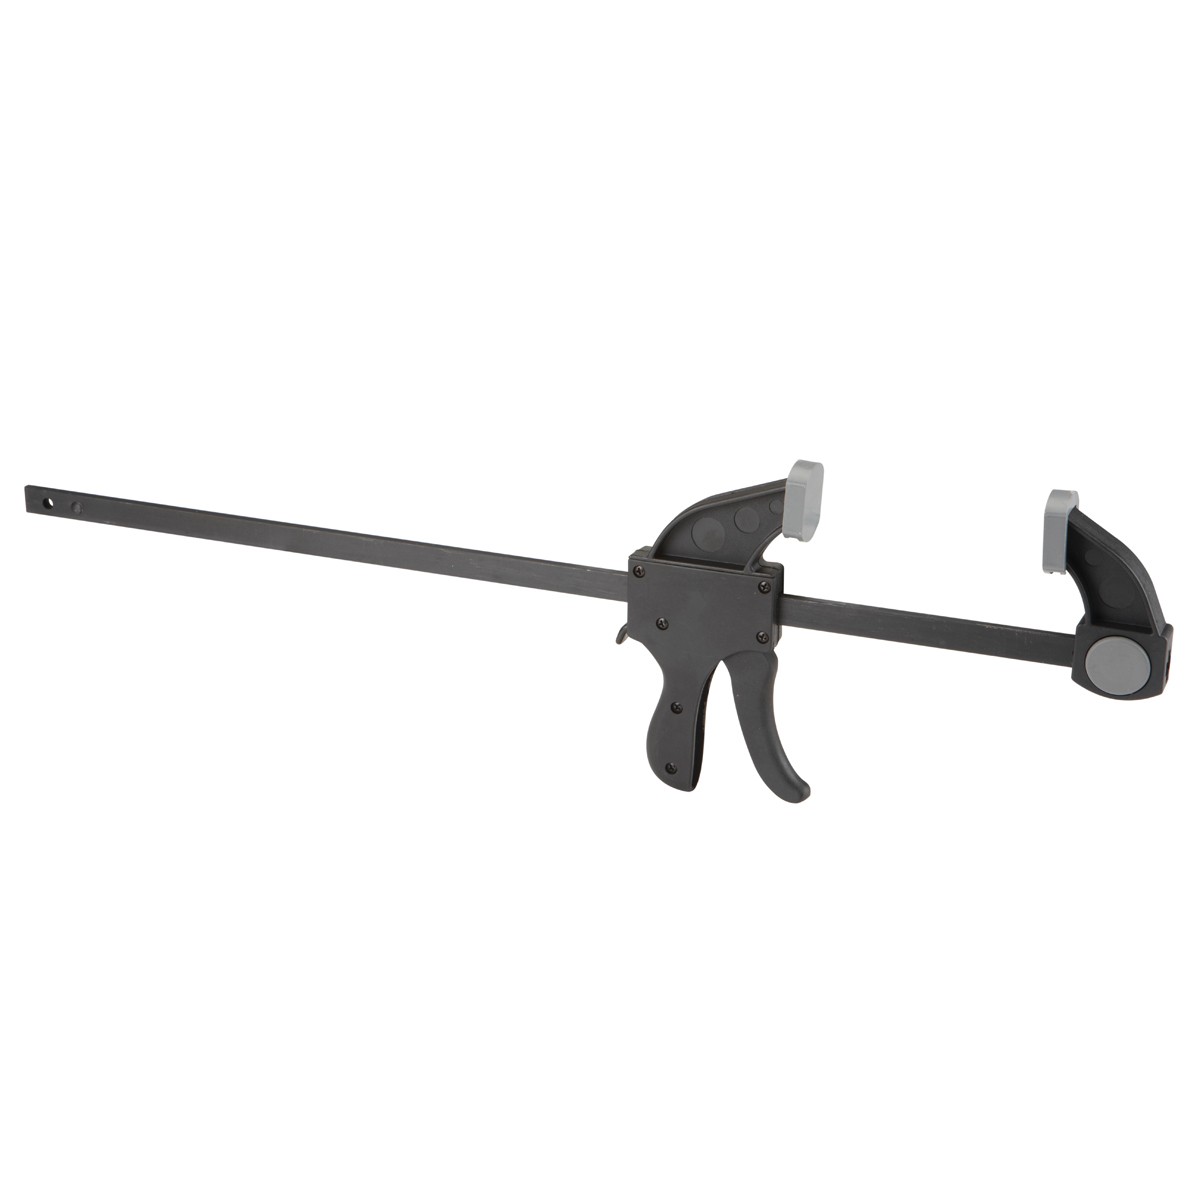 New   Pittsburgh  18 in. Ratcheting Bar Clamp / Spreader